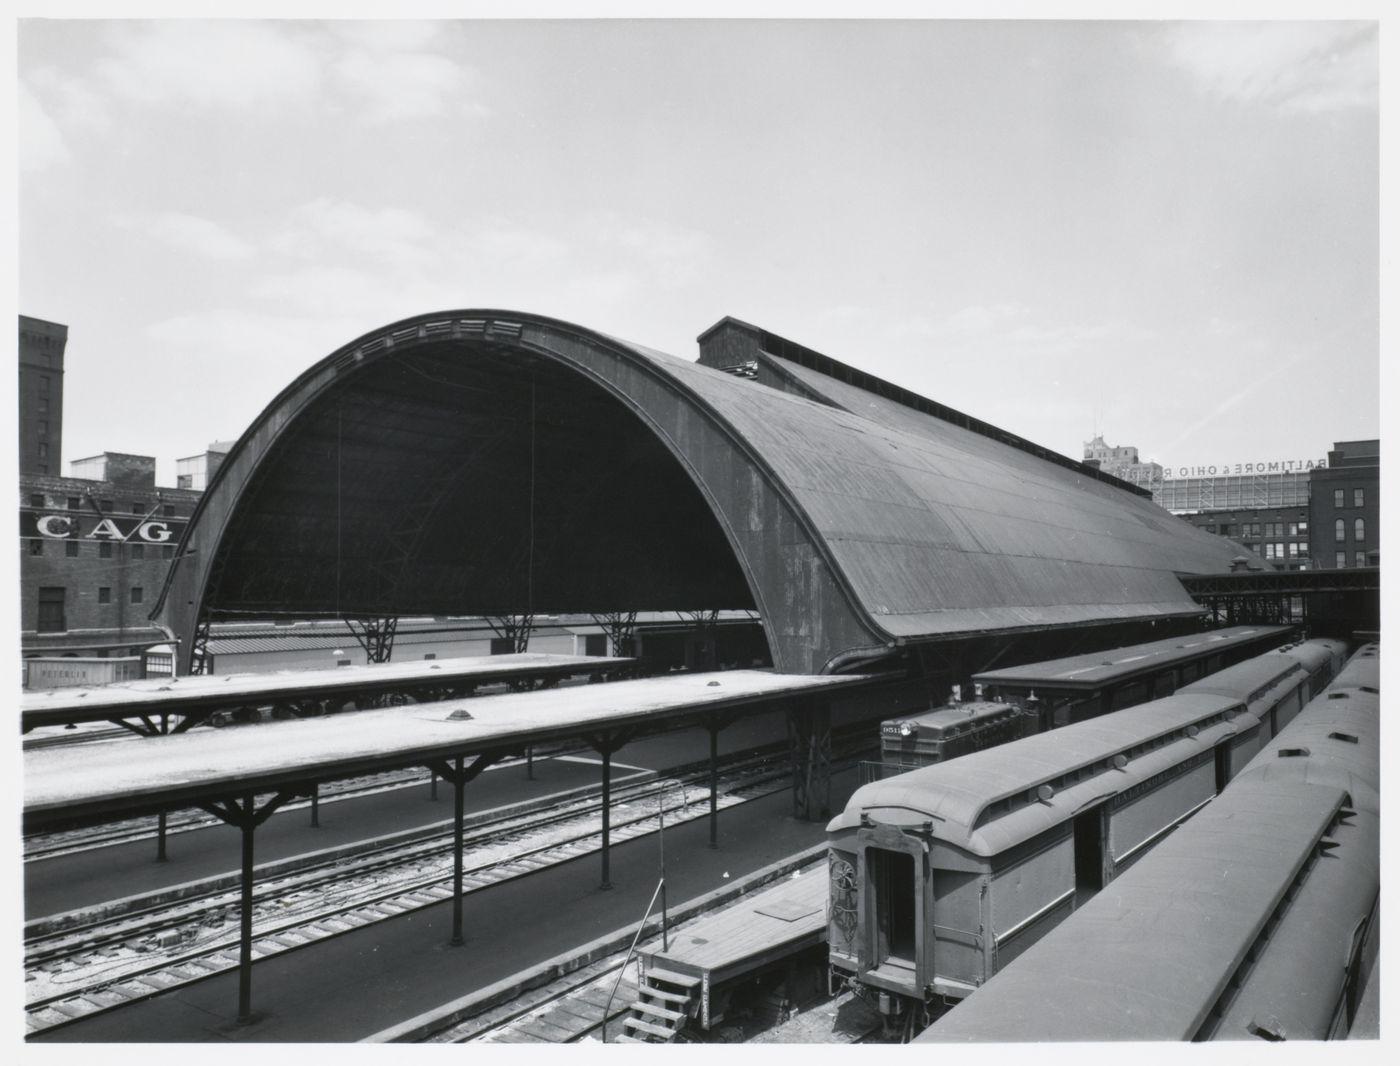 View of train shed and tracks, Chicago, Illinois